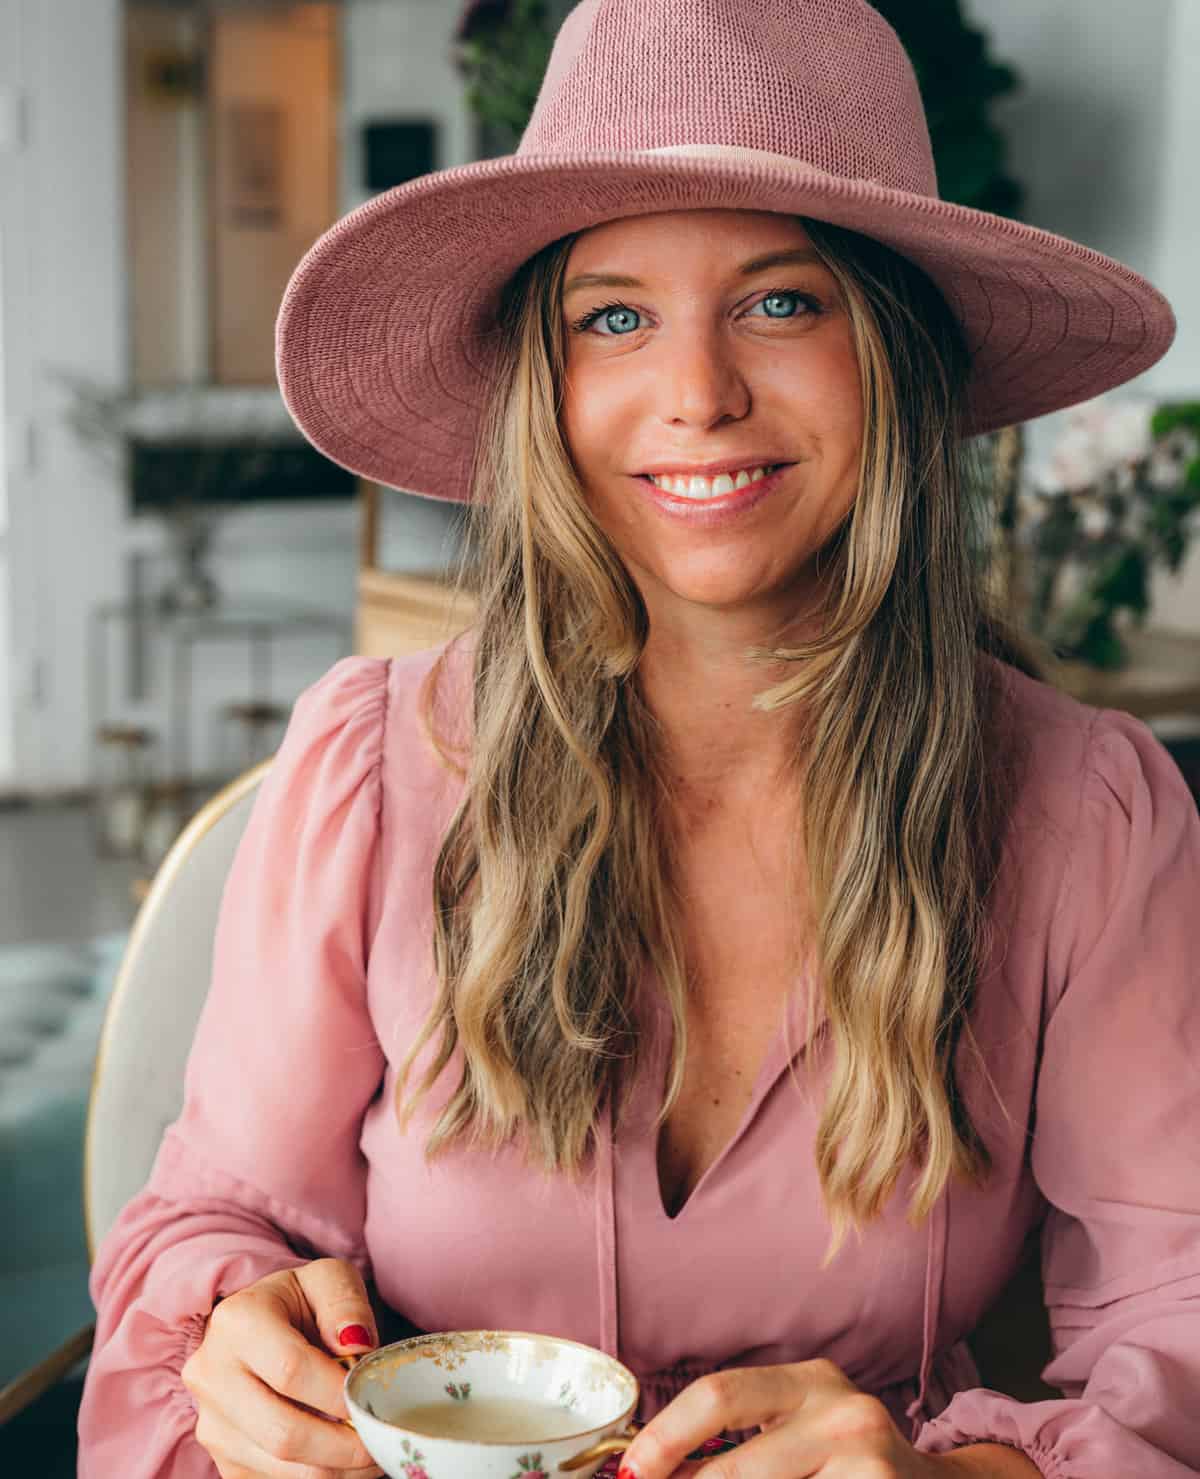 warm photo of woman with honey brown hair smiling with pink hat and pink Dress with bright blue eyes